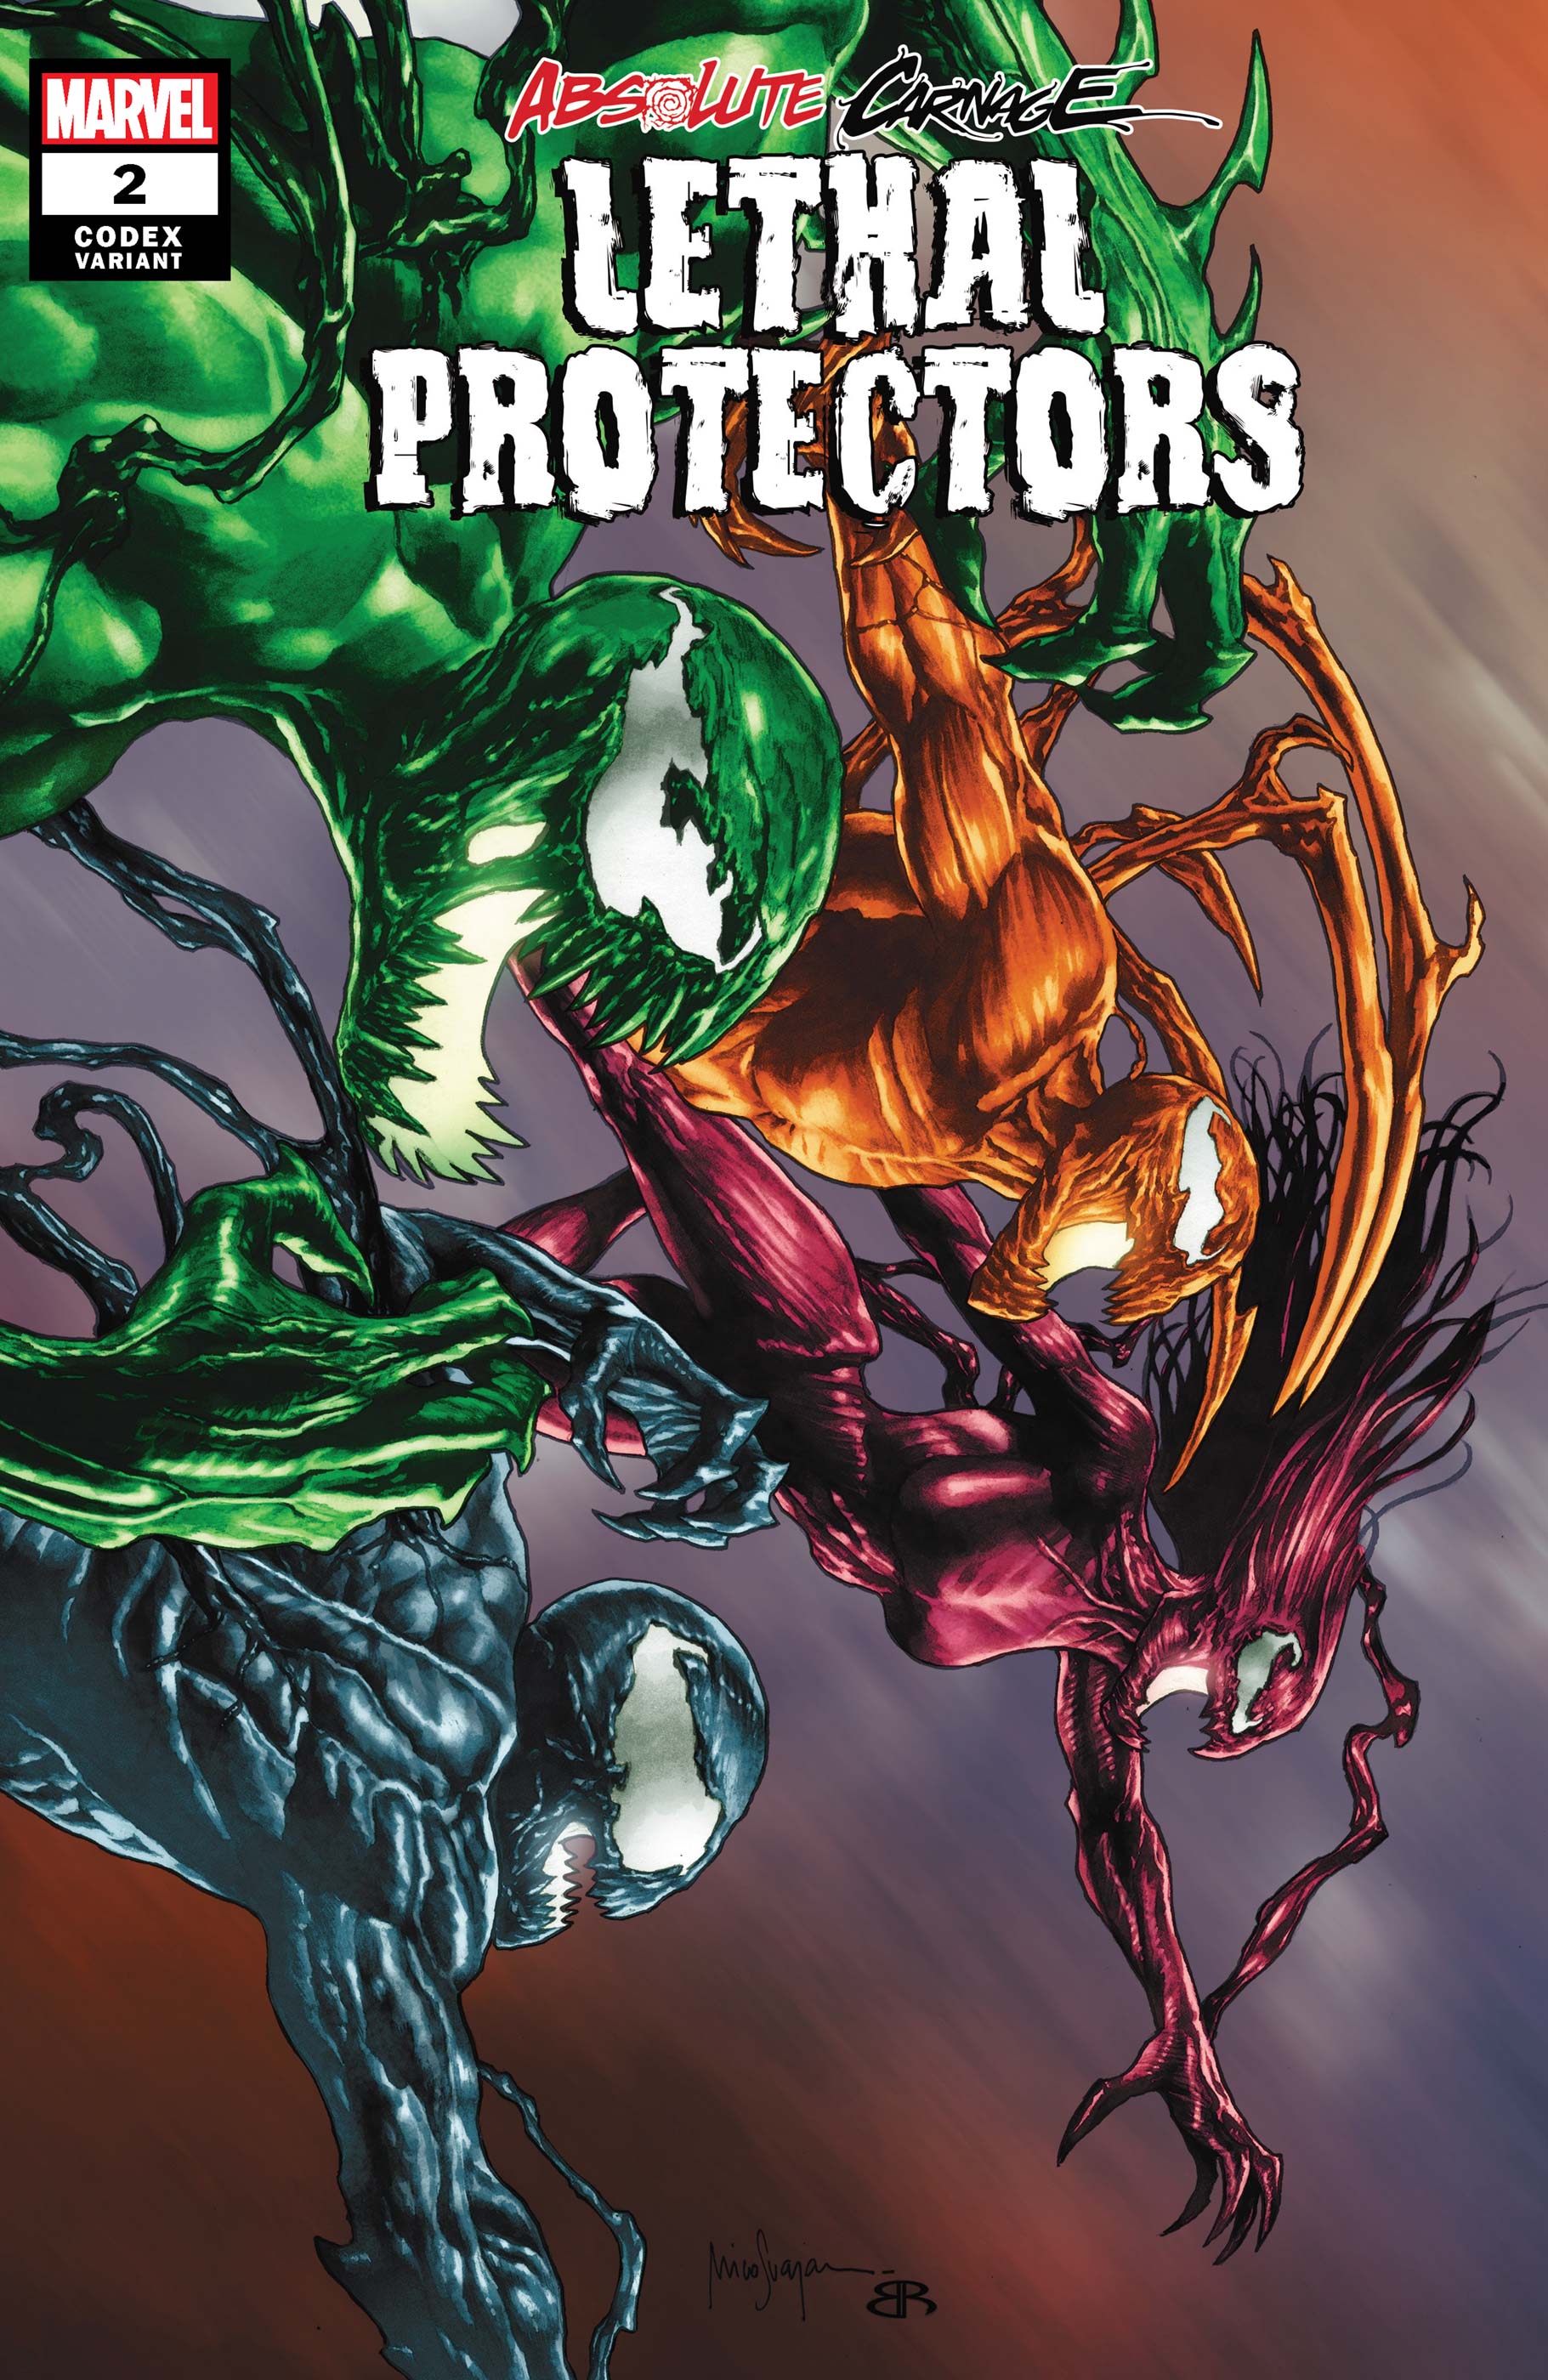 Absolute Carnage: Lethal Protectors (2019) #2 (Variant)